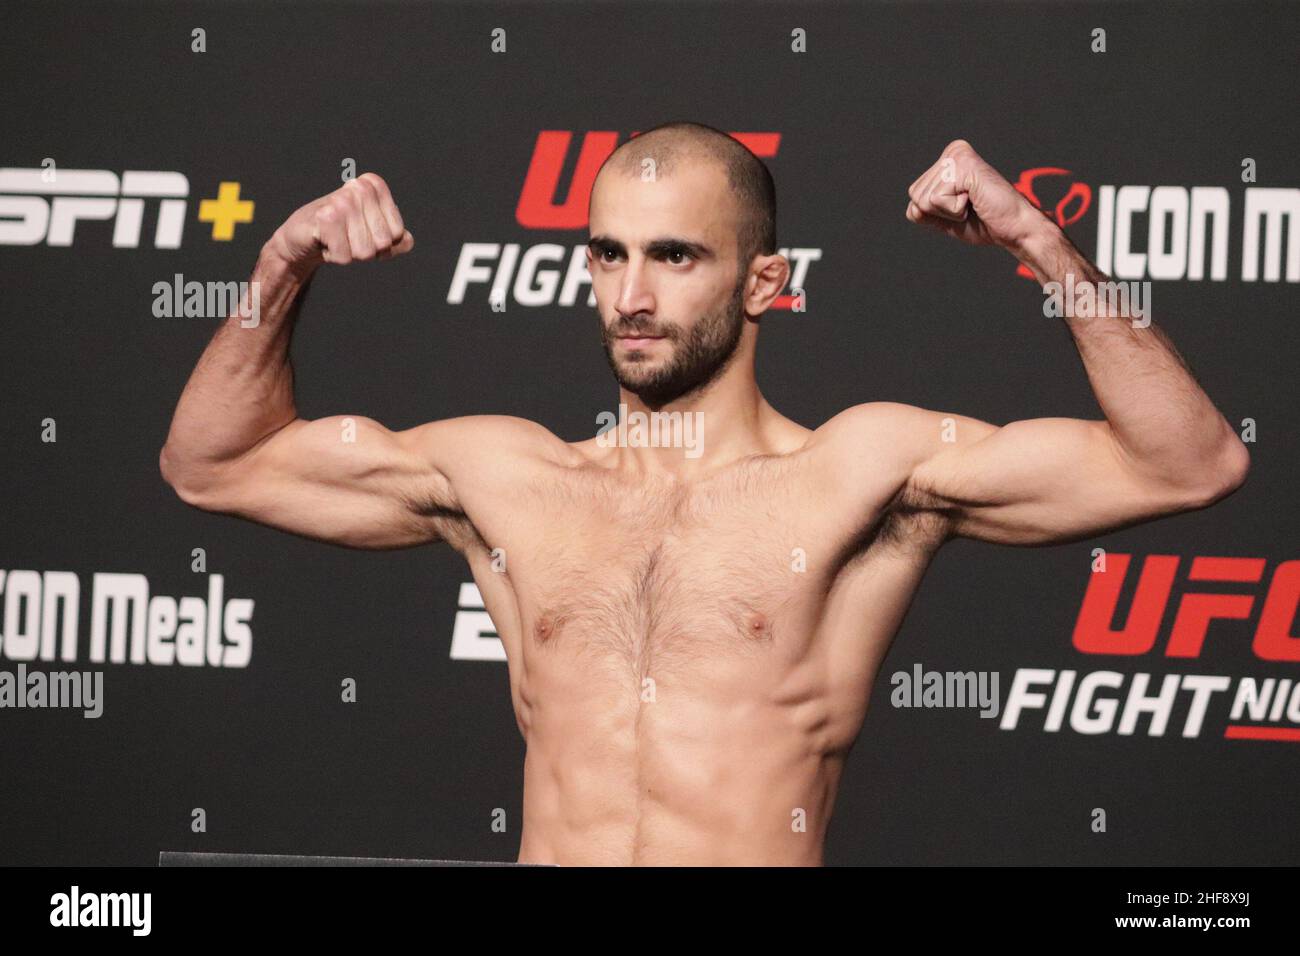 Las Vegas, USA. 14th Jan, 2022. LAS VEGAS, NV - JANUARY 14: Giga Chikadze poses on the scale during the UFC Vegas 46: Kattar v Chikadze Weigh in at UFC Apex on January 14, 2022 in Las Vegas, Nevada, United States. (Photo by Diego Ribas/PxImages) Credit: Px Images/Alamy Live News Stock Photo